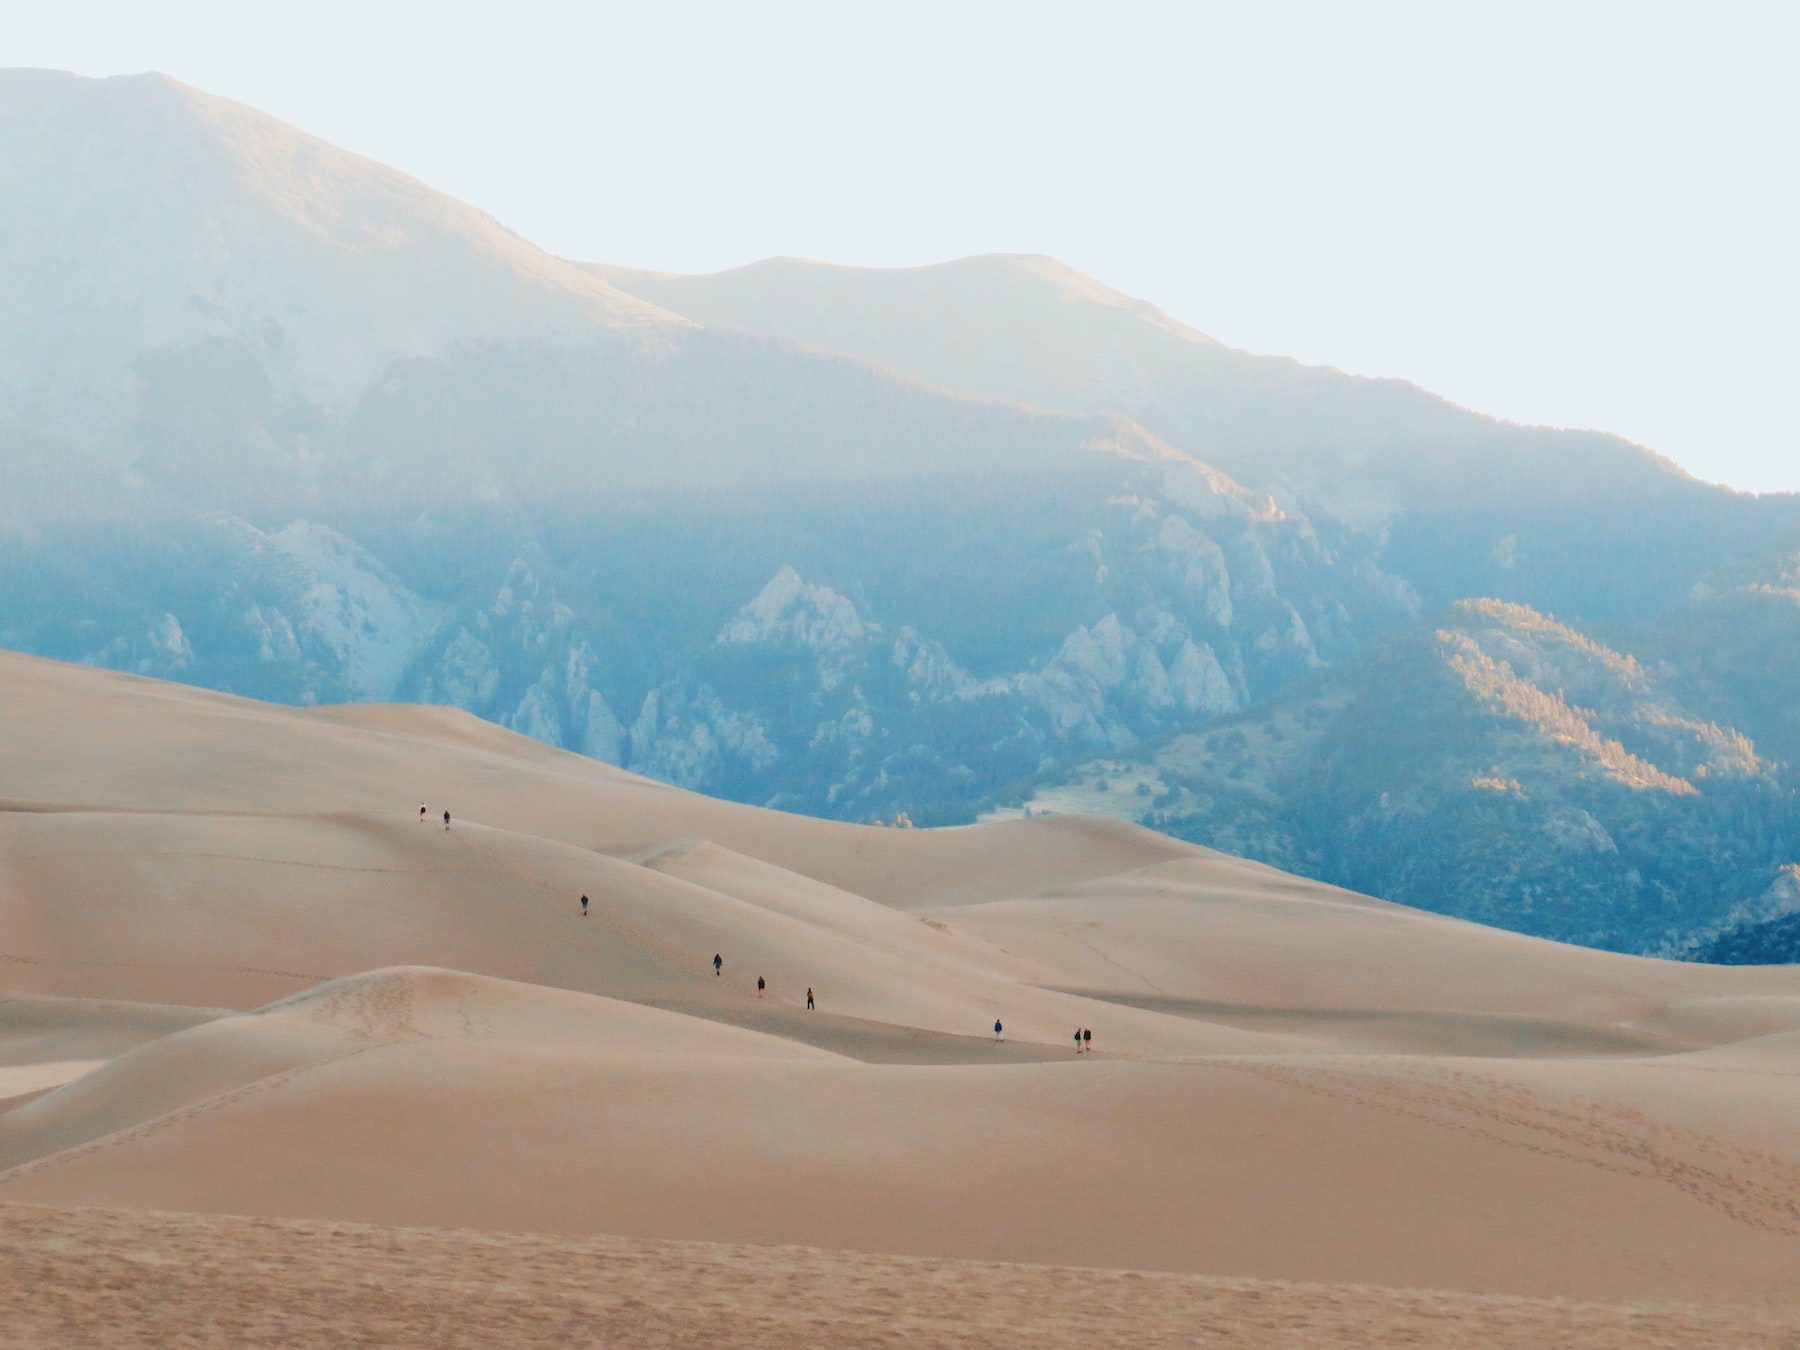 Landscape portrait of Great Sand Dunes, one of the most popular national parks in Colorado.